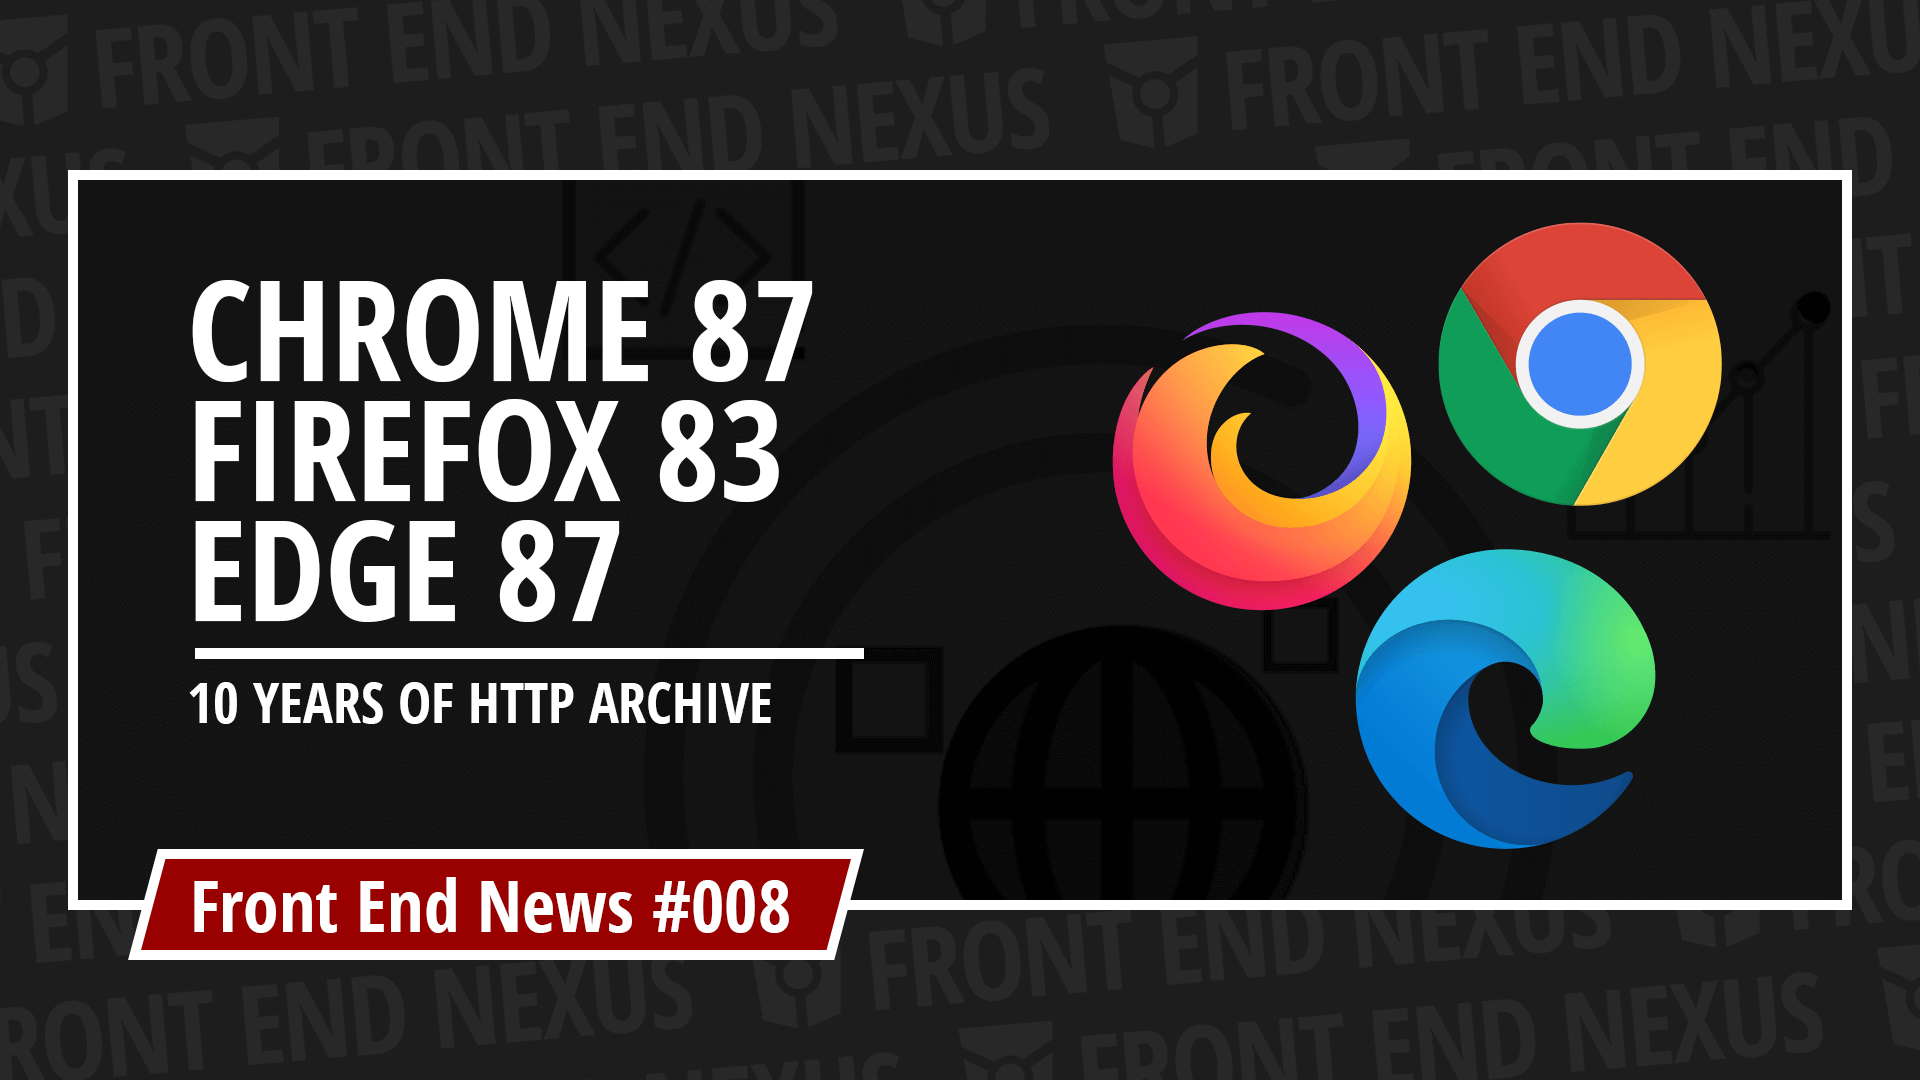 Major browser updates - Chrome 87, Edge 87, and Firefox 83 - and 10 years of HTTP Archive | Front End News #008